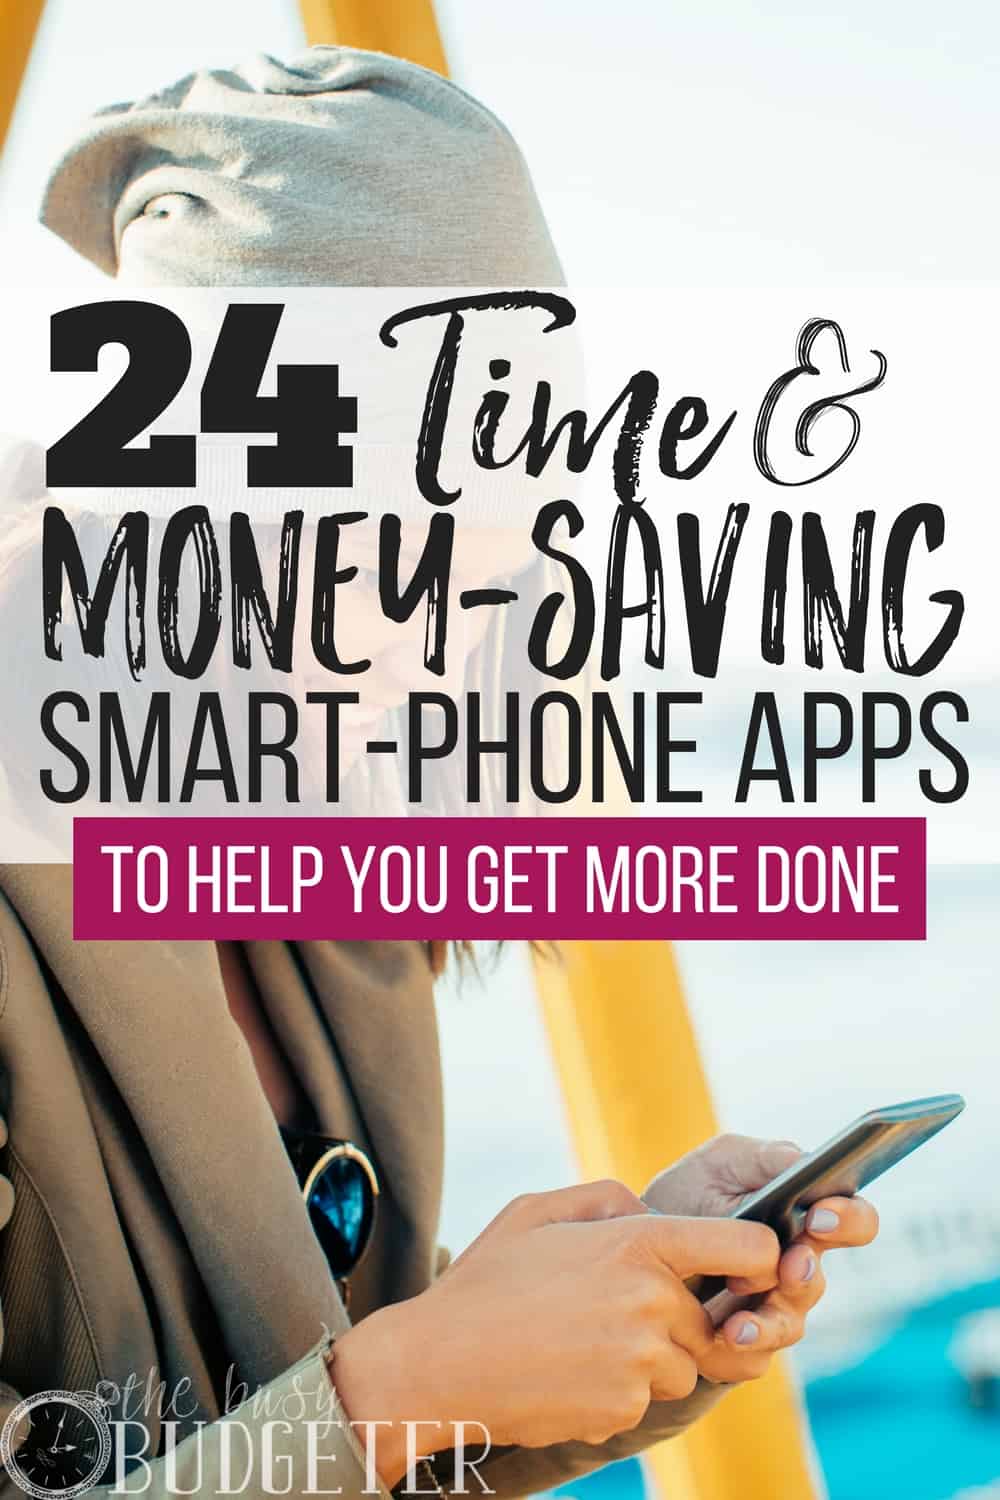 I was skeptical about some of these but wow! I can't believe how much these apps have actually helped me save money and time! I figured, I didn't have anything to lose and it turned out to be quite a budget win!